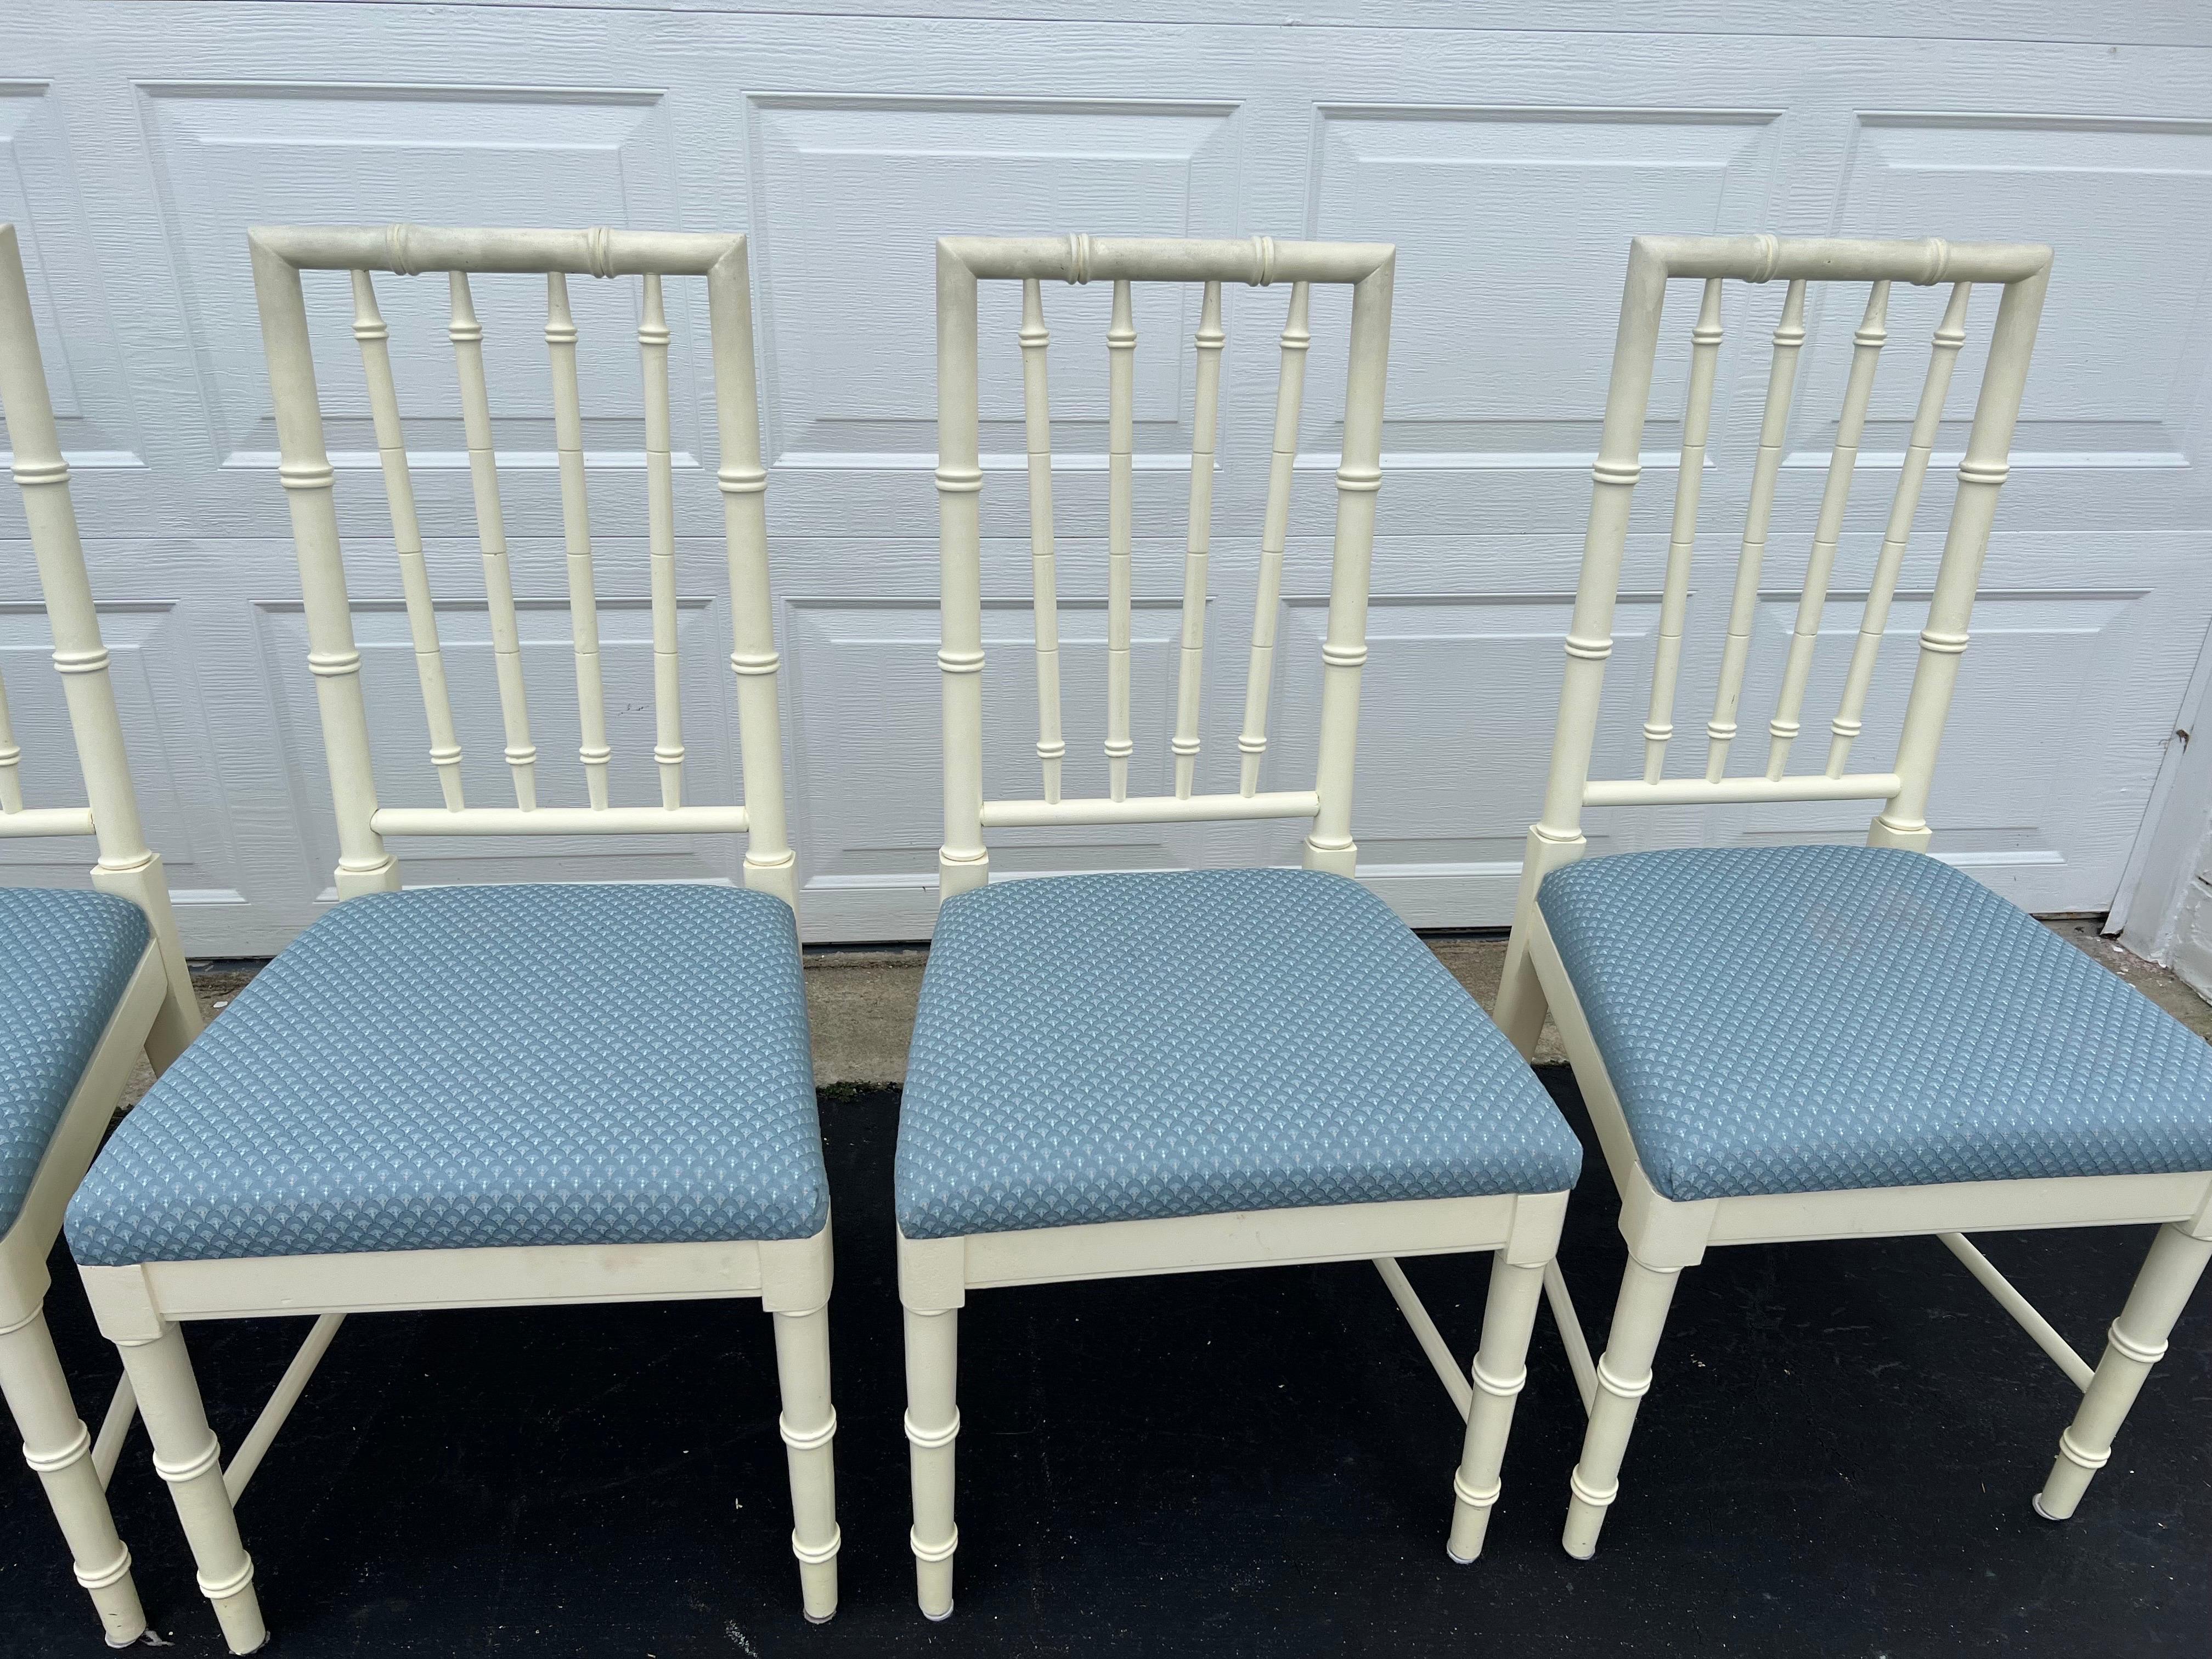 Set of Six Thomasville Faux Bamboo Dining Chairs
Lovely matching set (Table also available) signed Thomasville. Perfect coastal set with  Faux Bamboo Chinoserie style. Seats are covered in a light blue sturday upholstery. But easy to recover if